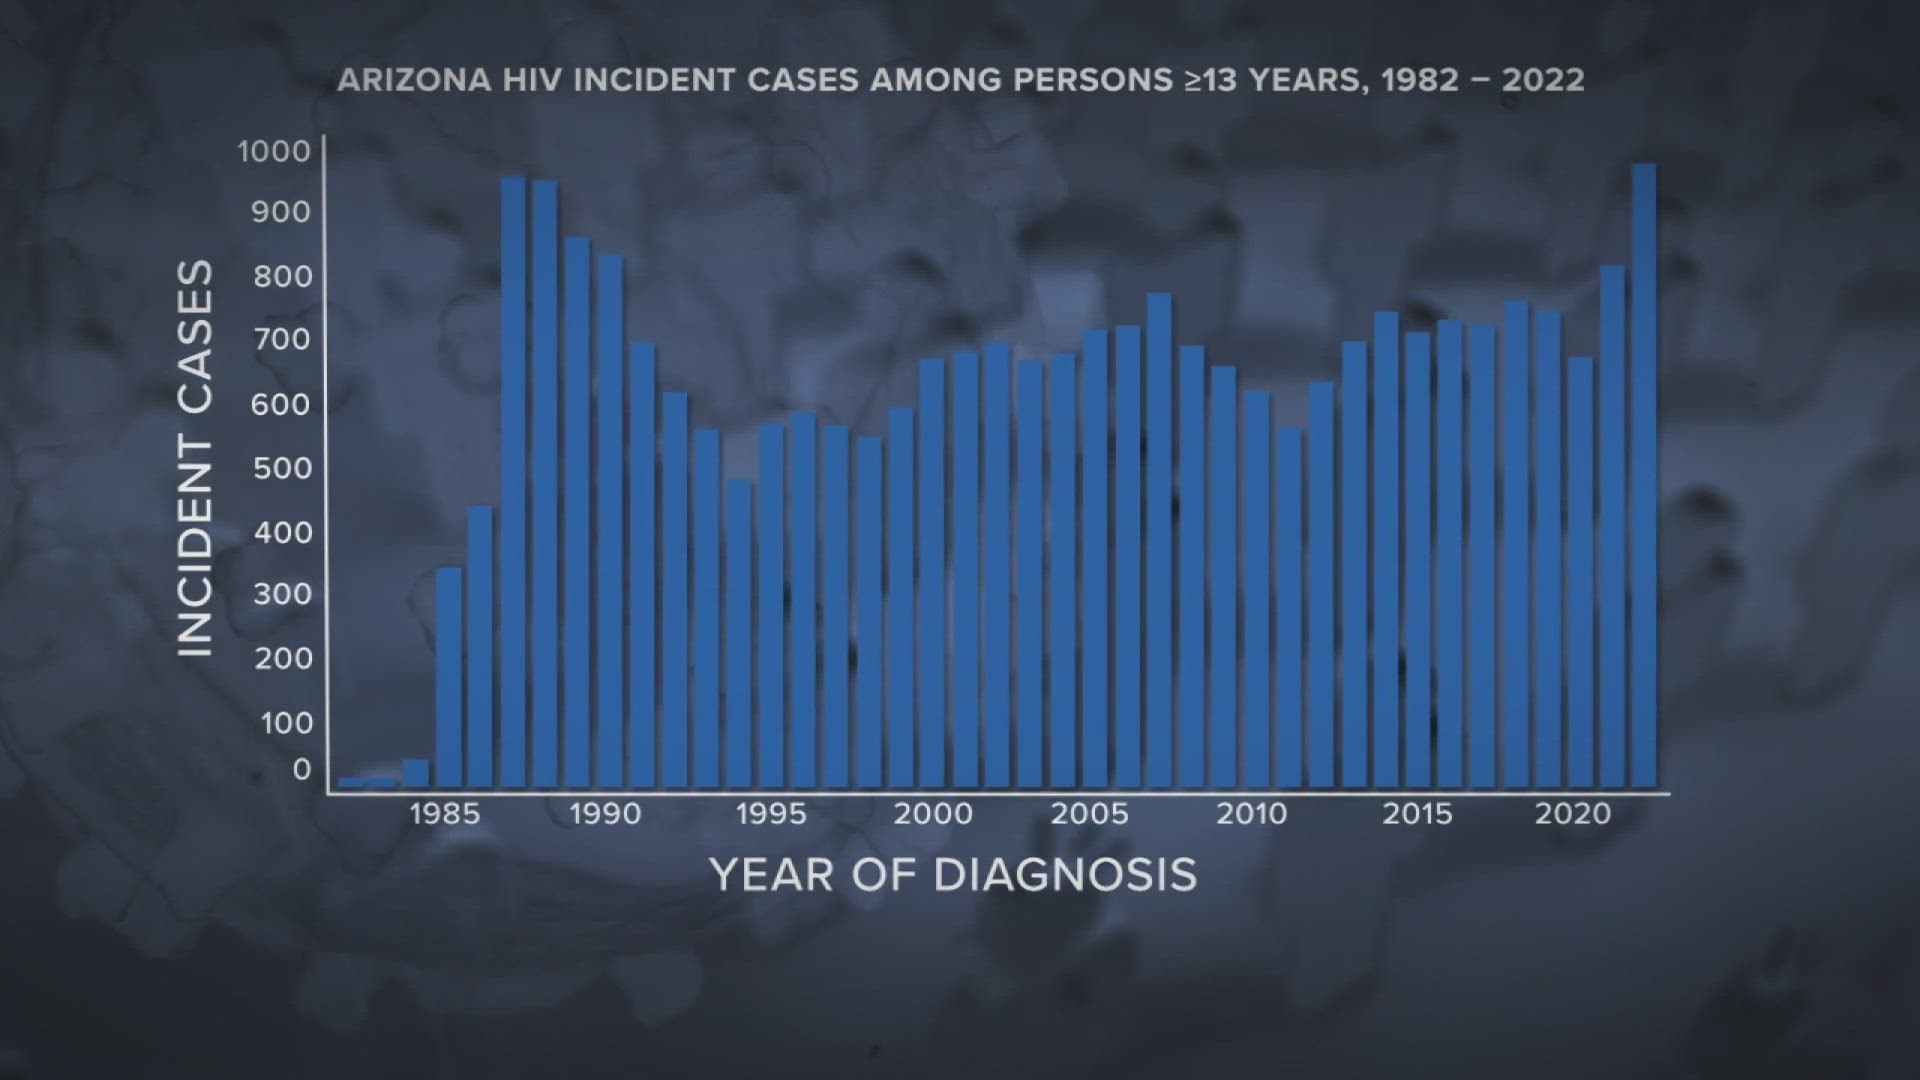 Nearly 1,000 Arizonans learned they had HIV throughout the year.